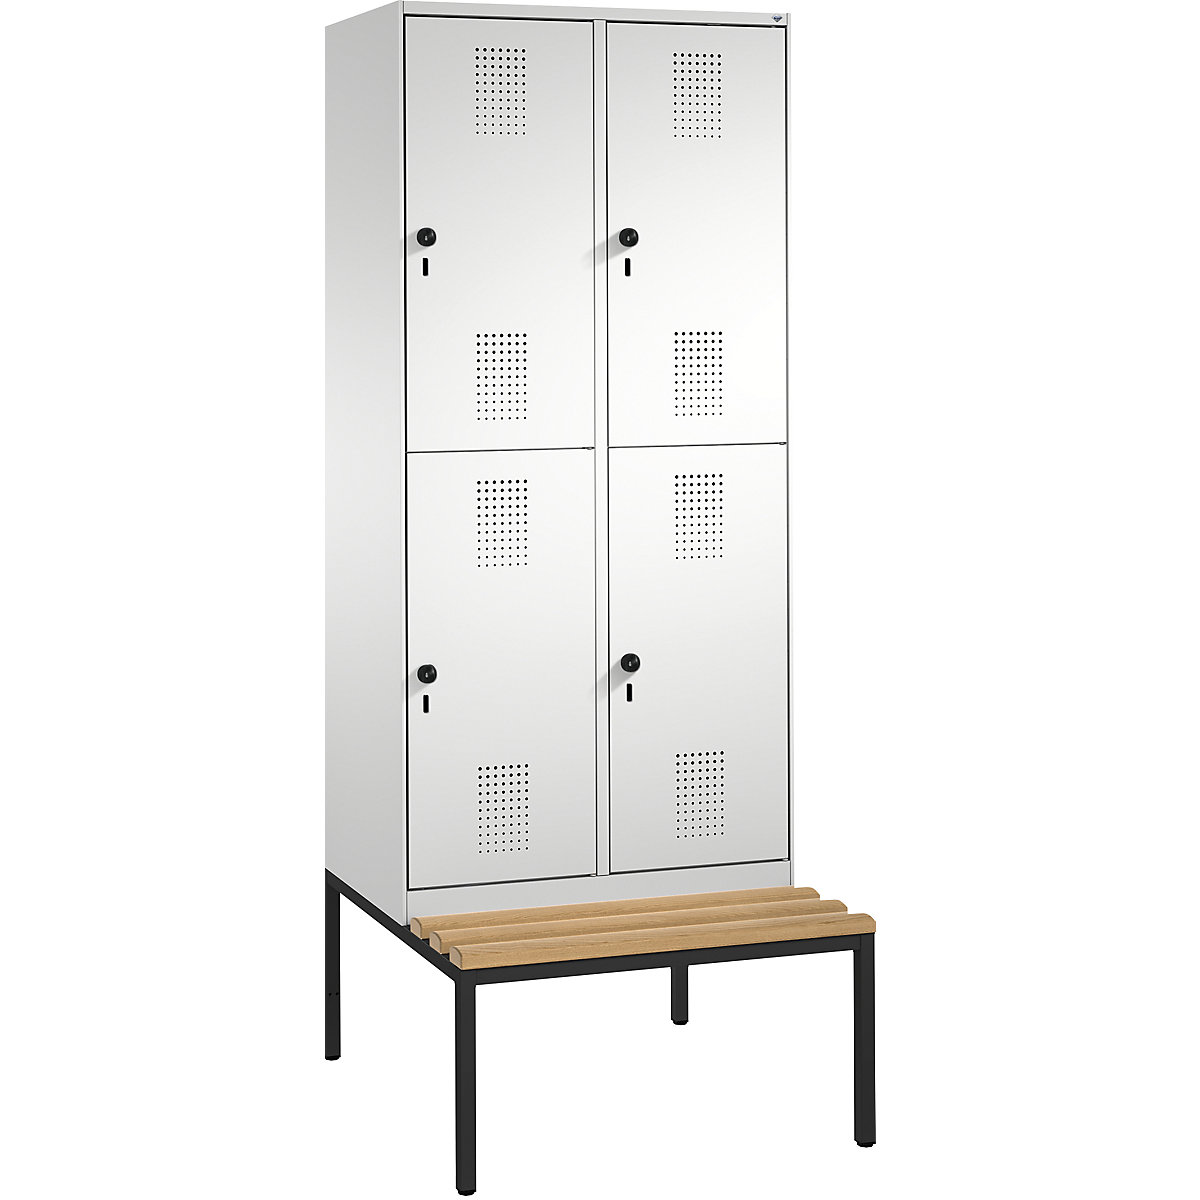 EVOLO cloakroom locker, double tier, with bench – C+P, 2 compartments, 2 shelf compartments each, compartment width 400 mm, light grey-11